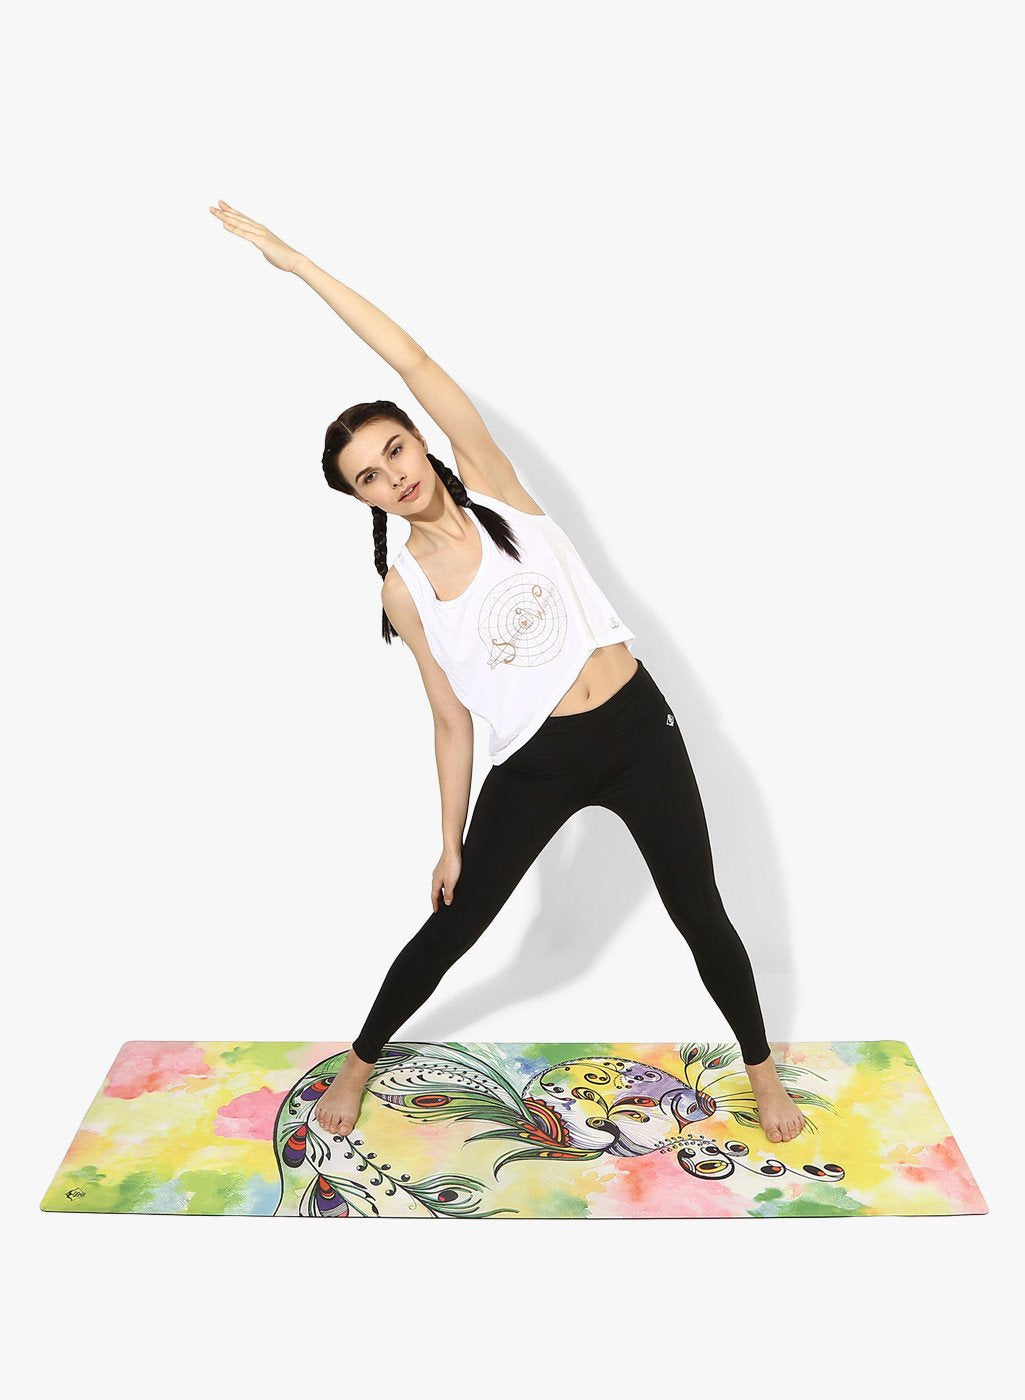 Zobhana Yoga Mat - Colorful and vibrant, this mat boasts exceptional cushioning and non-slip grip for an enchanting yoga experience.